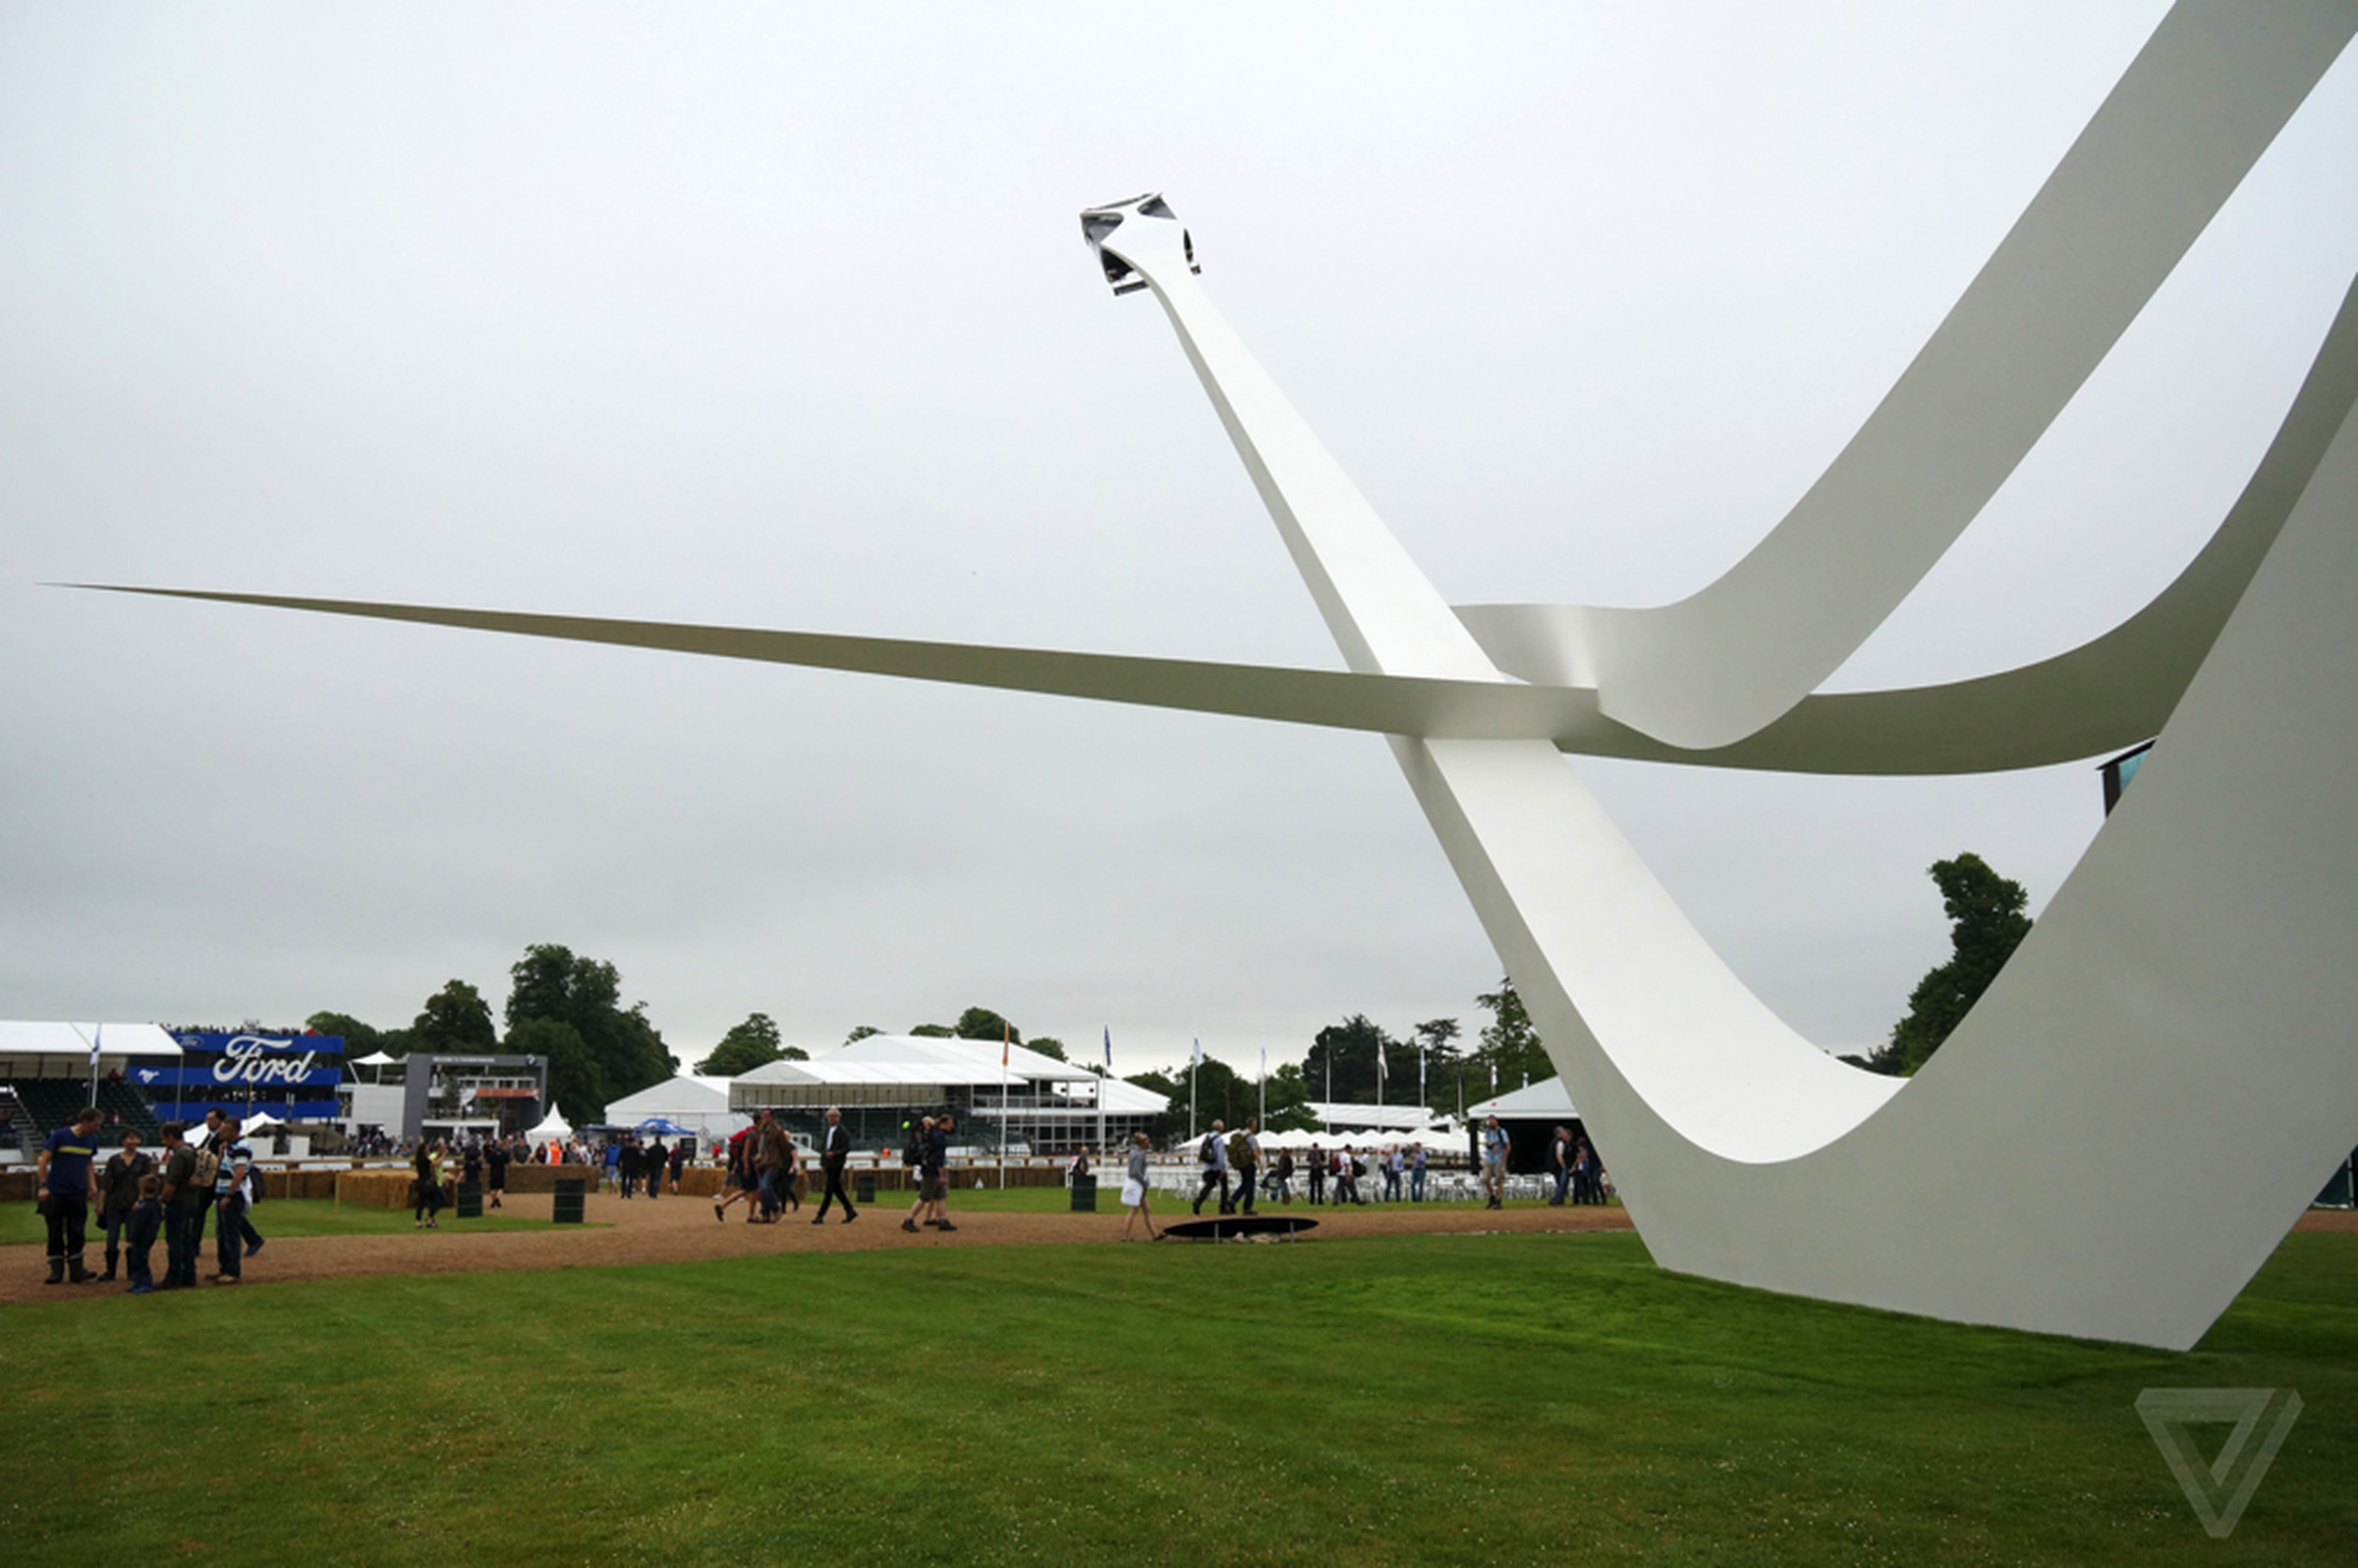 BMW Central Feature at Goodwood